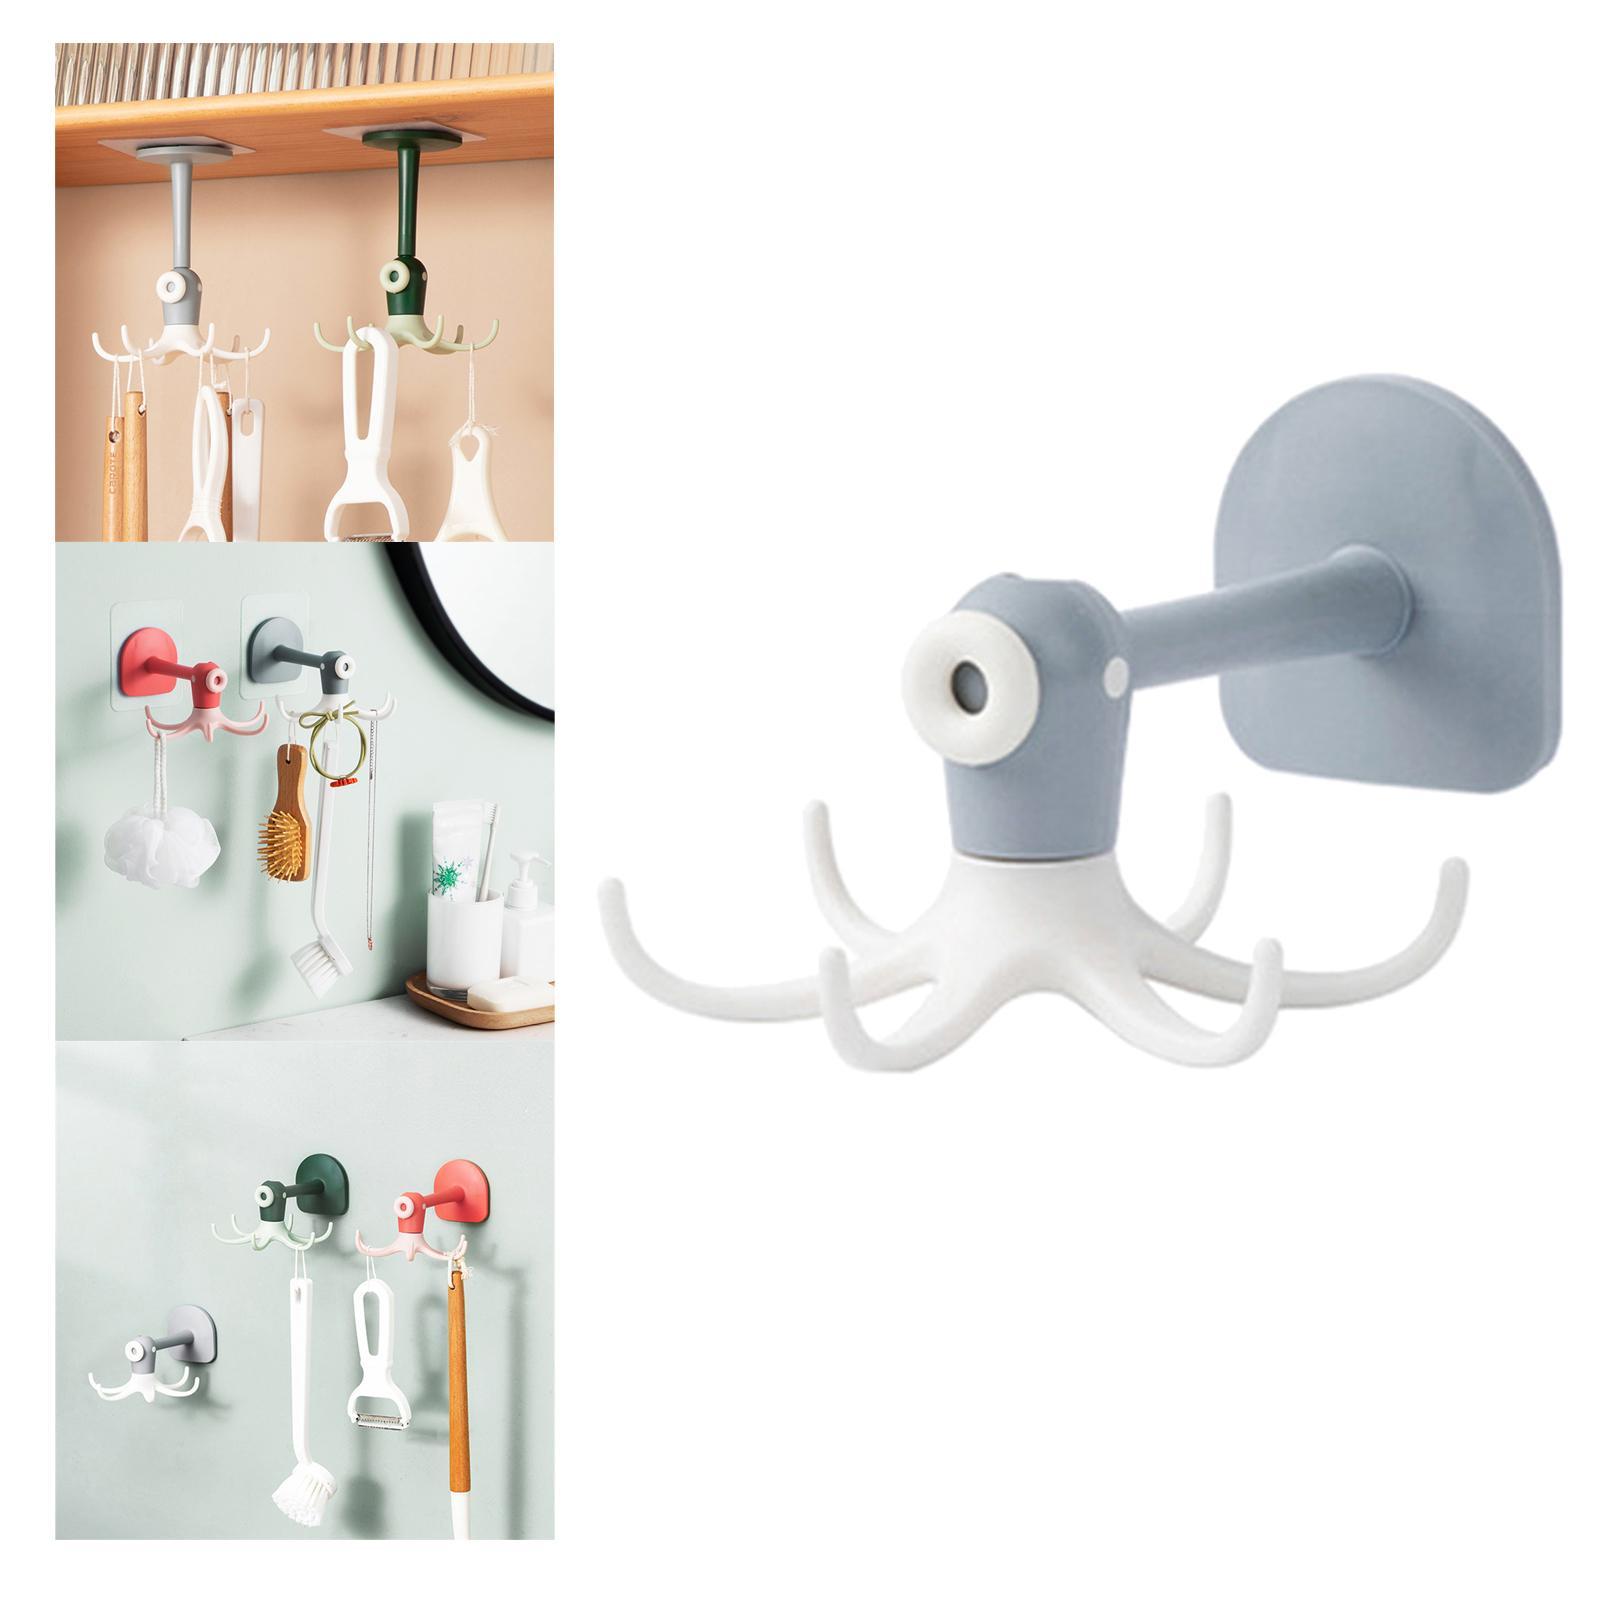  A punch-free wall mount octopus hook featuring various hooks and a 360° rotatable design for convenient usage